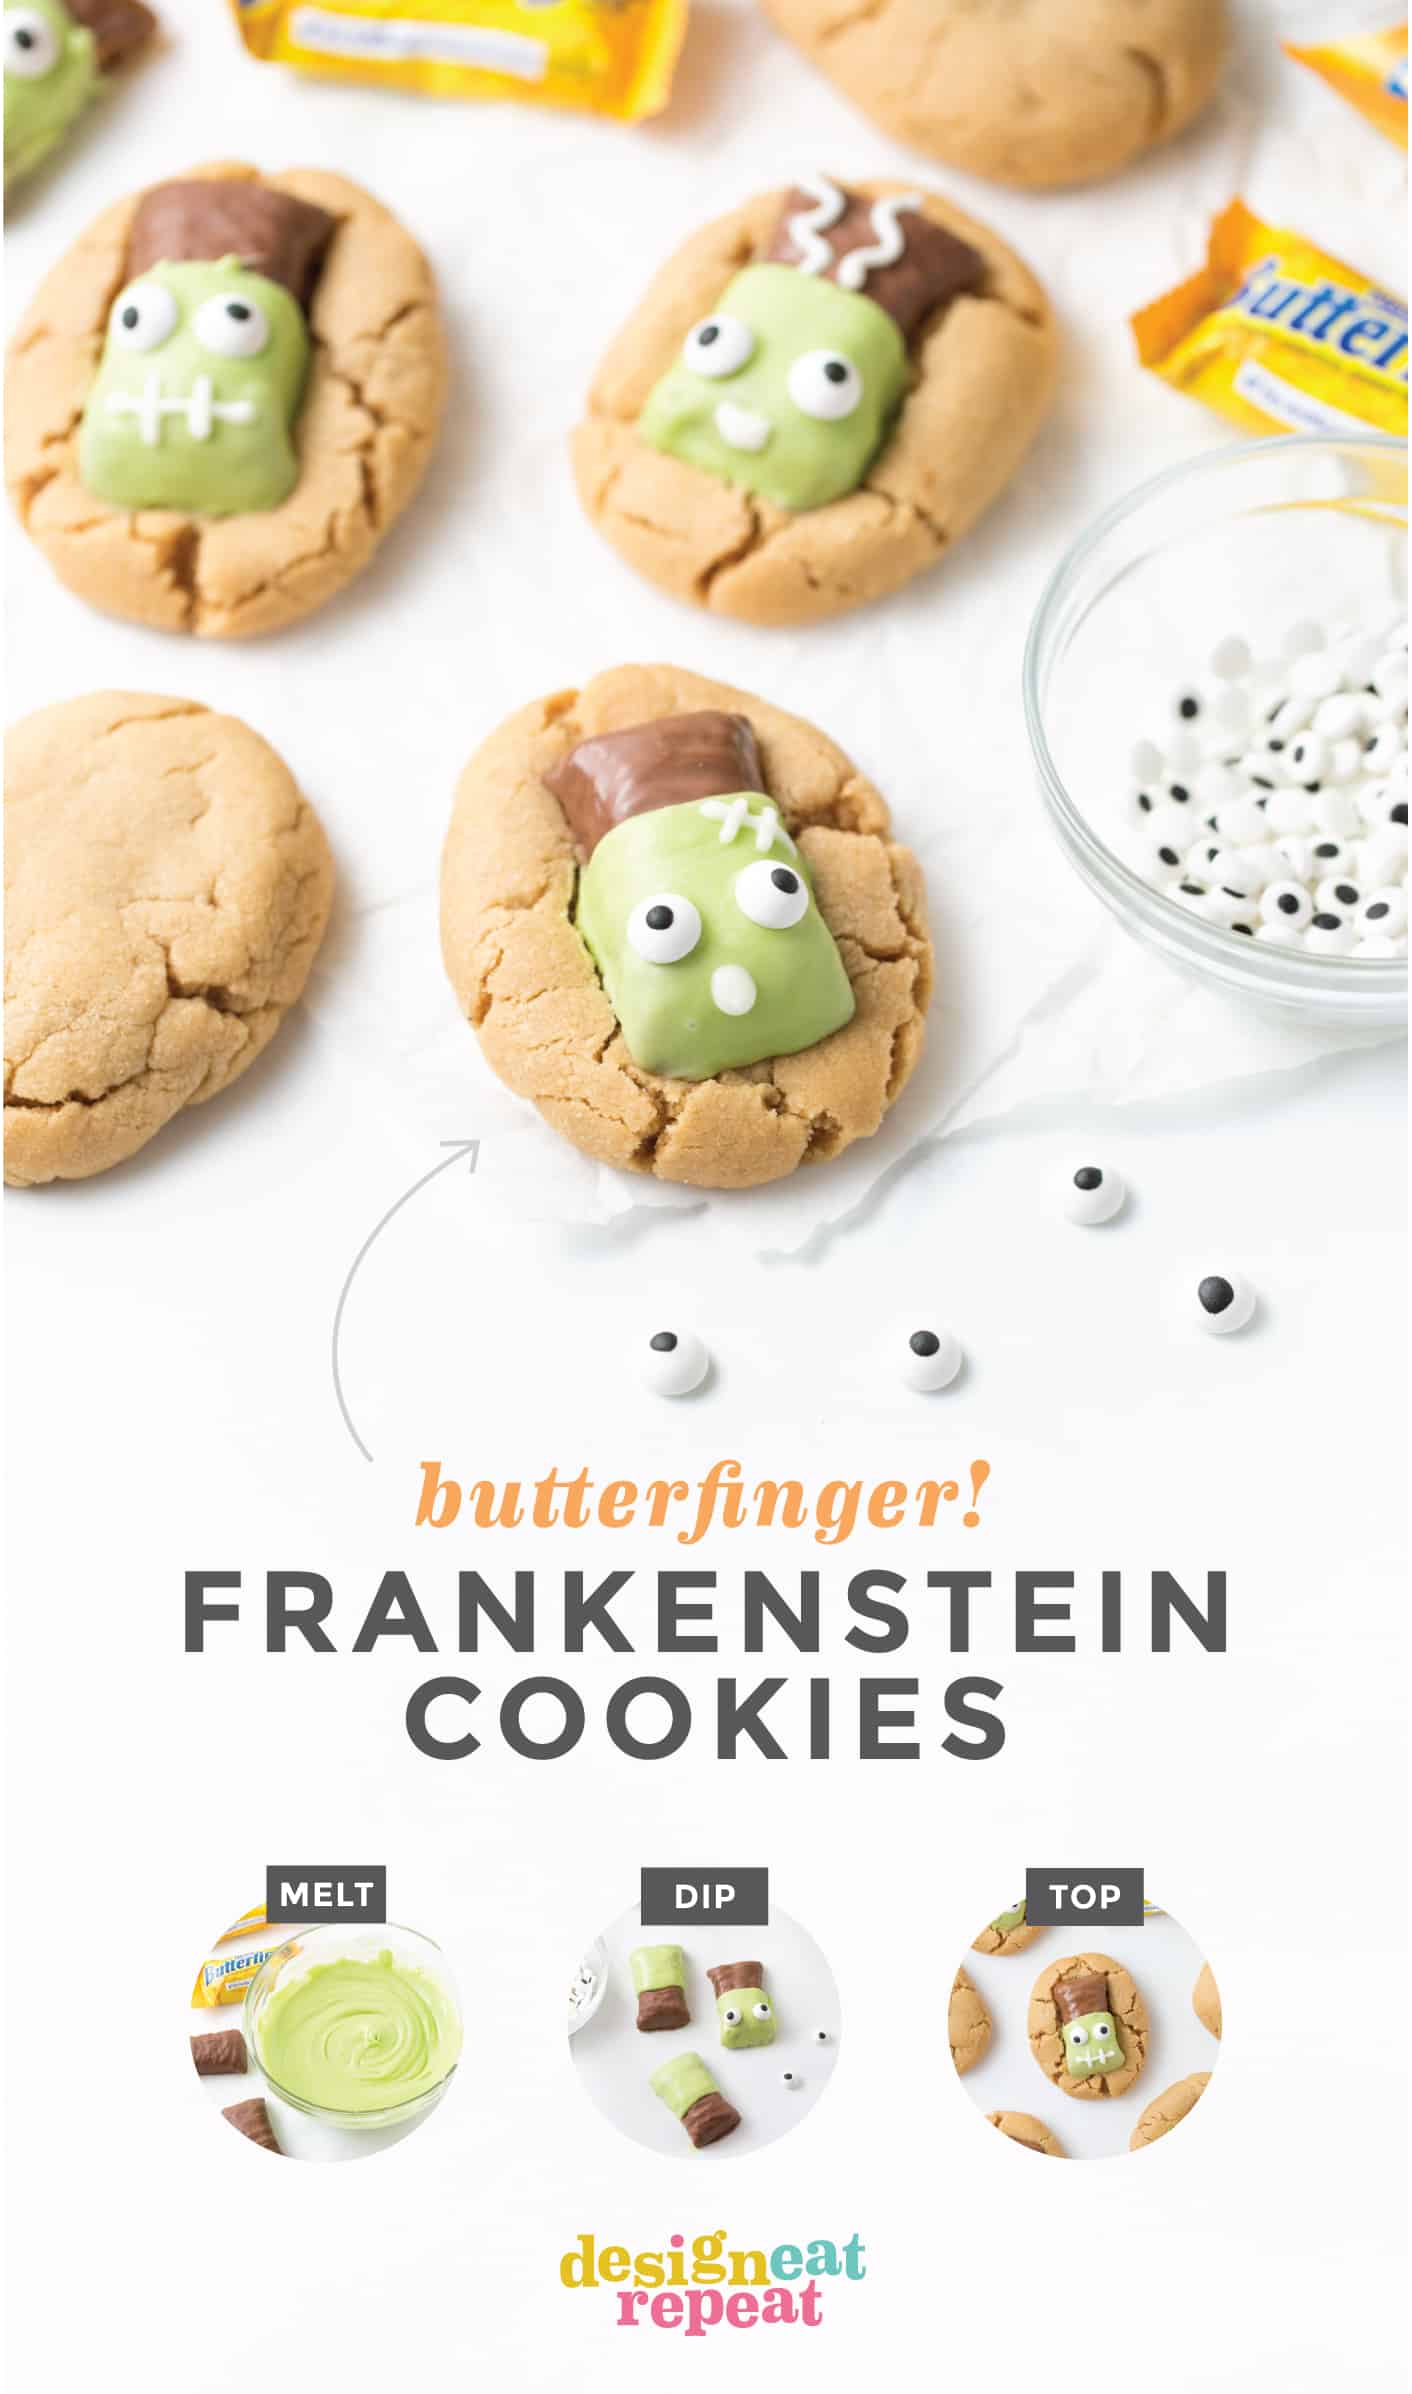 Peanut Butter Cookies with Butterfinger Frankensteins on top. Butterfinger candy bar dipped in green white chocolate then decorated with eyeballs on top.